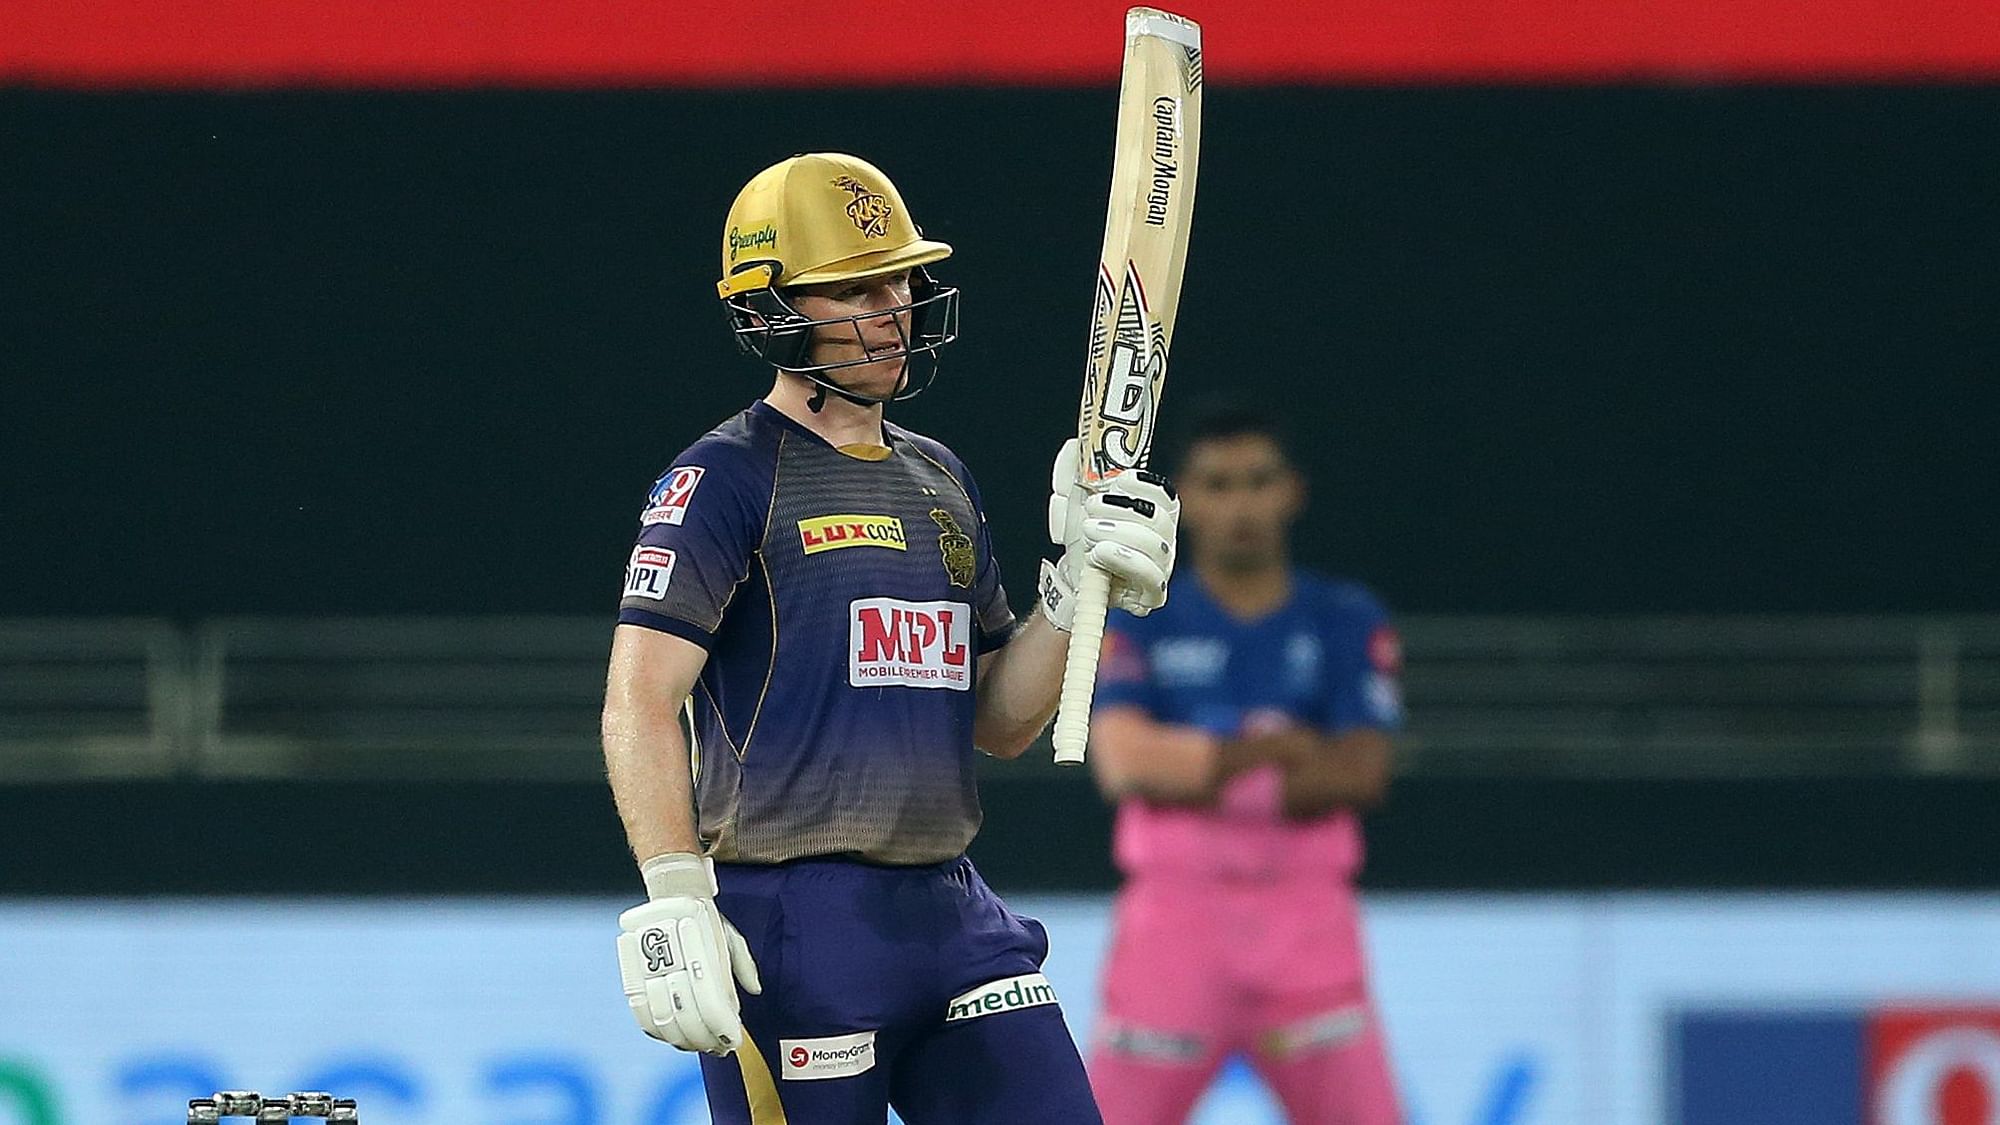 Yet another must-win game of this IPL weekend and KKR have posted 191/2 vs Rajasthan.